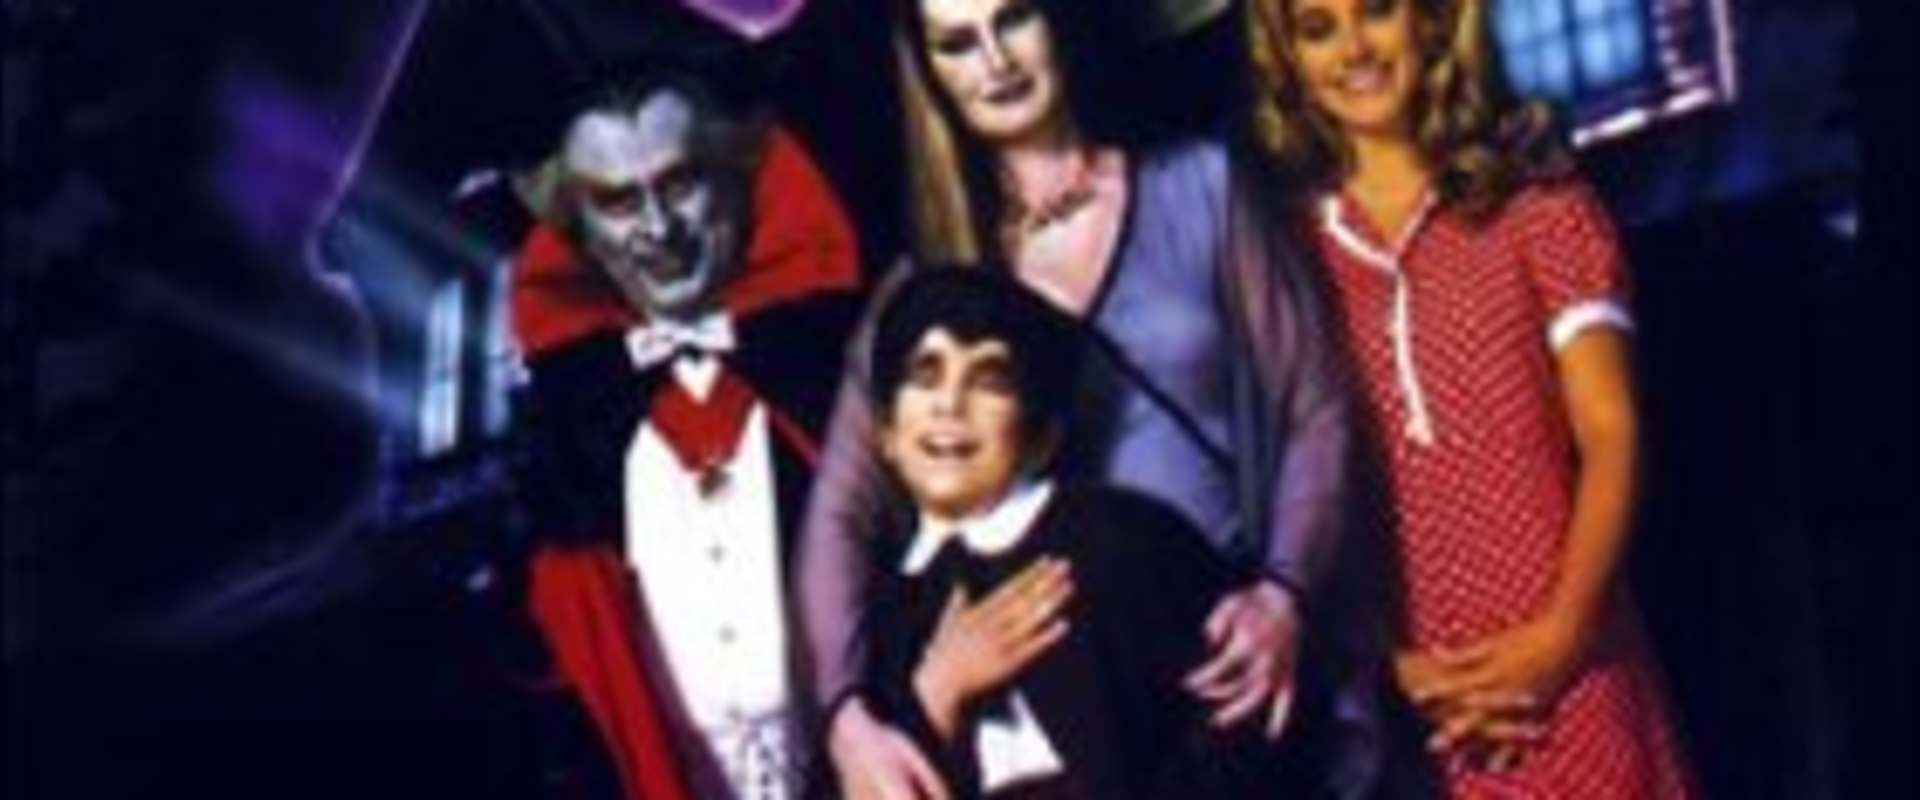 Here Come the Munsters background 2